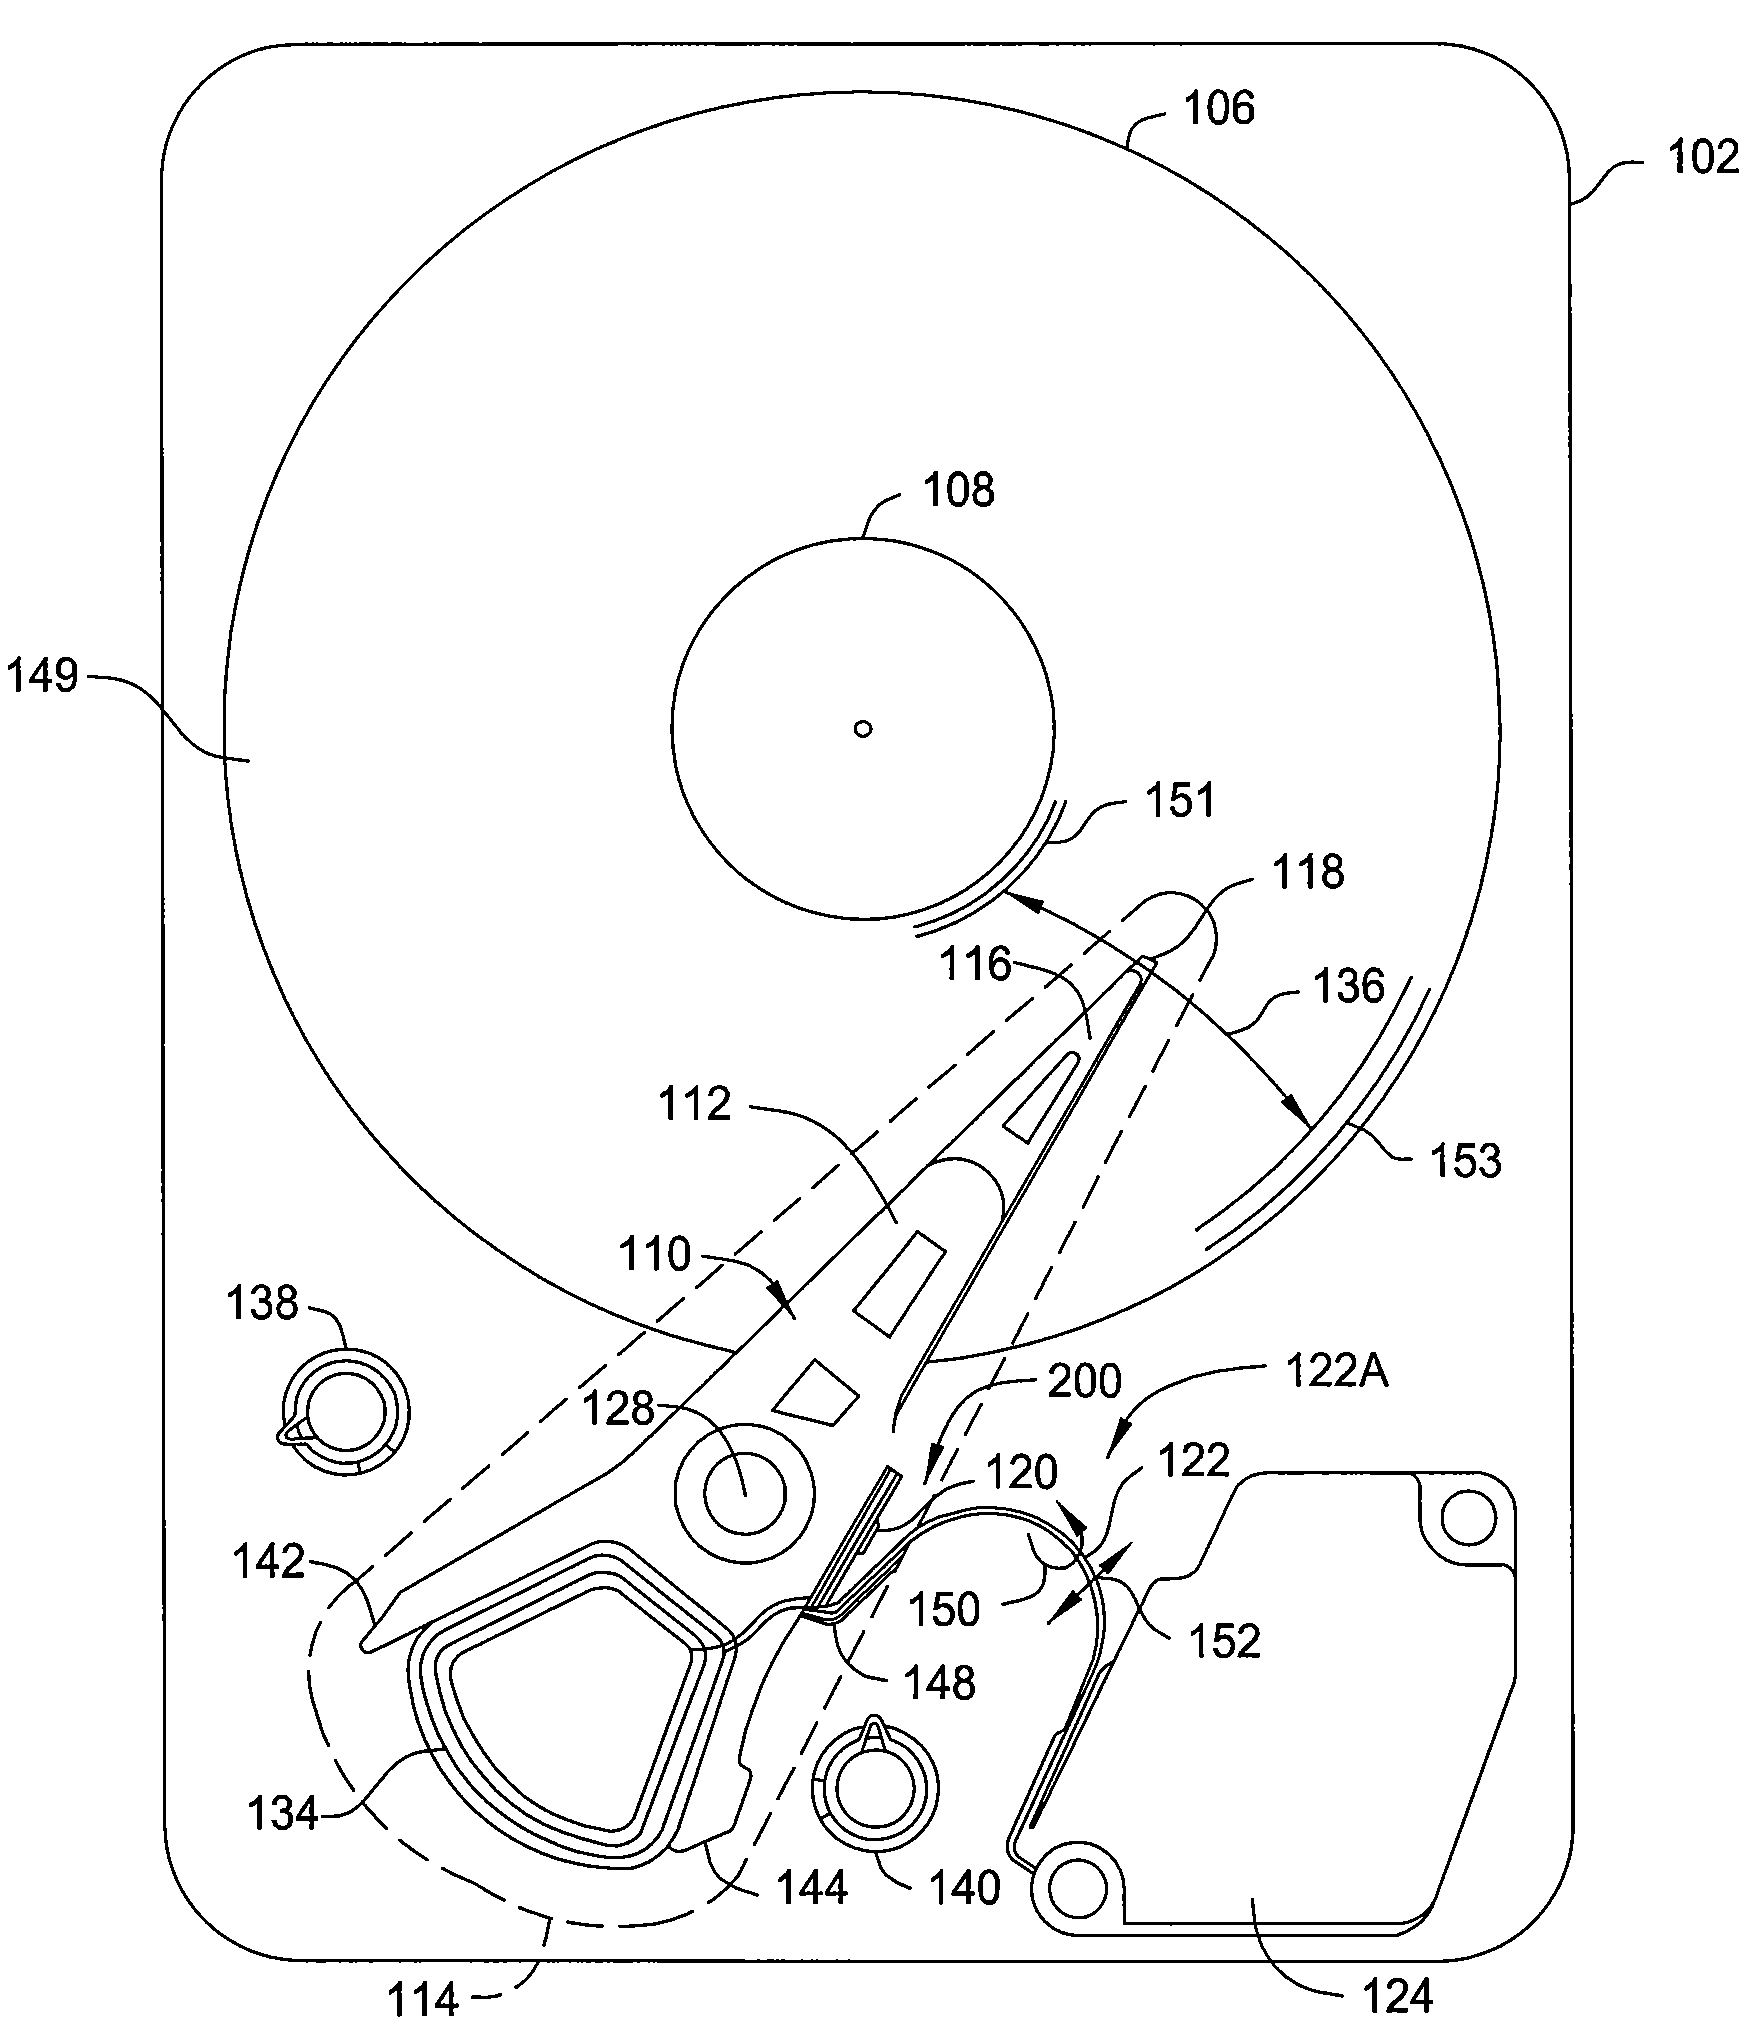 Disk Drive Assembly Having Flexible Support for Flexible Printed Circuit Board